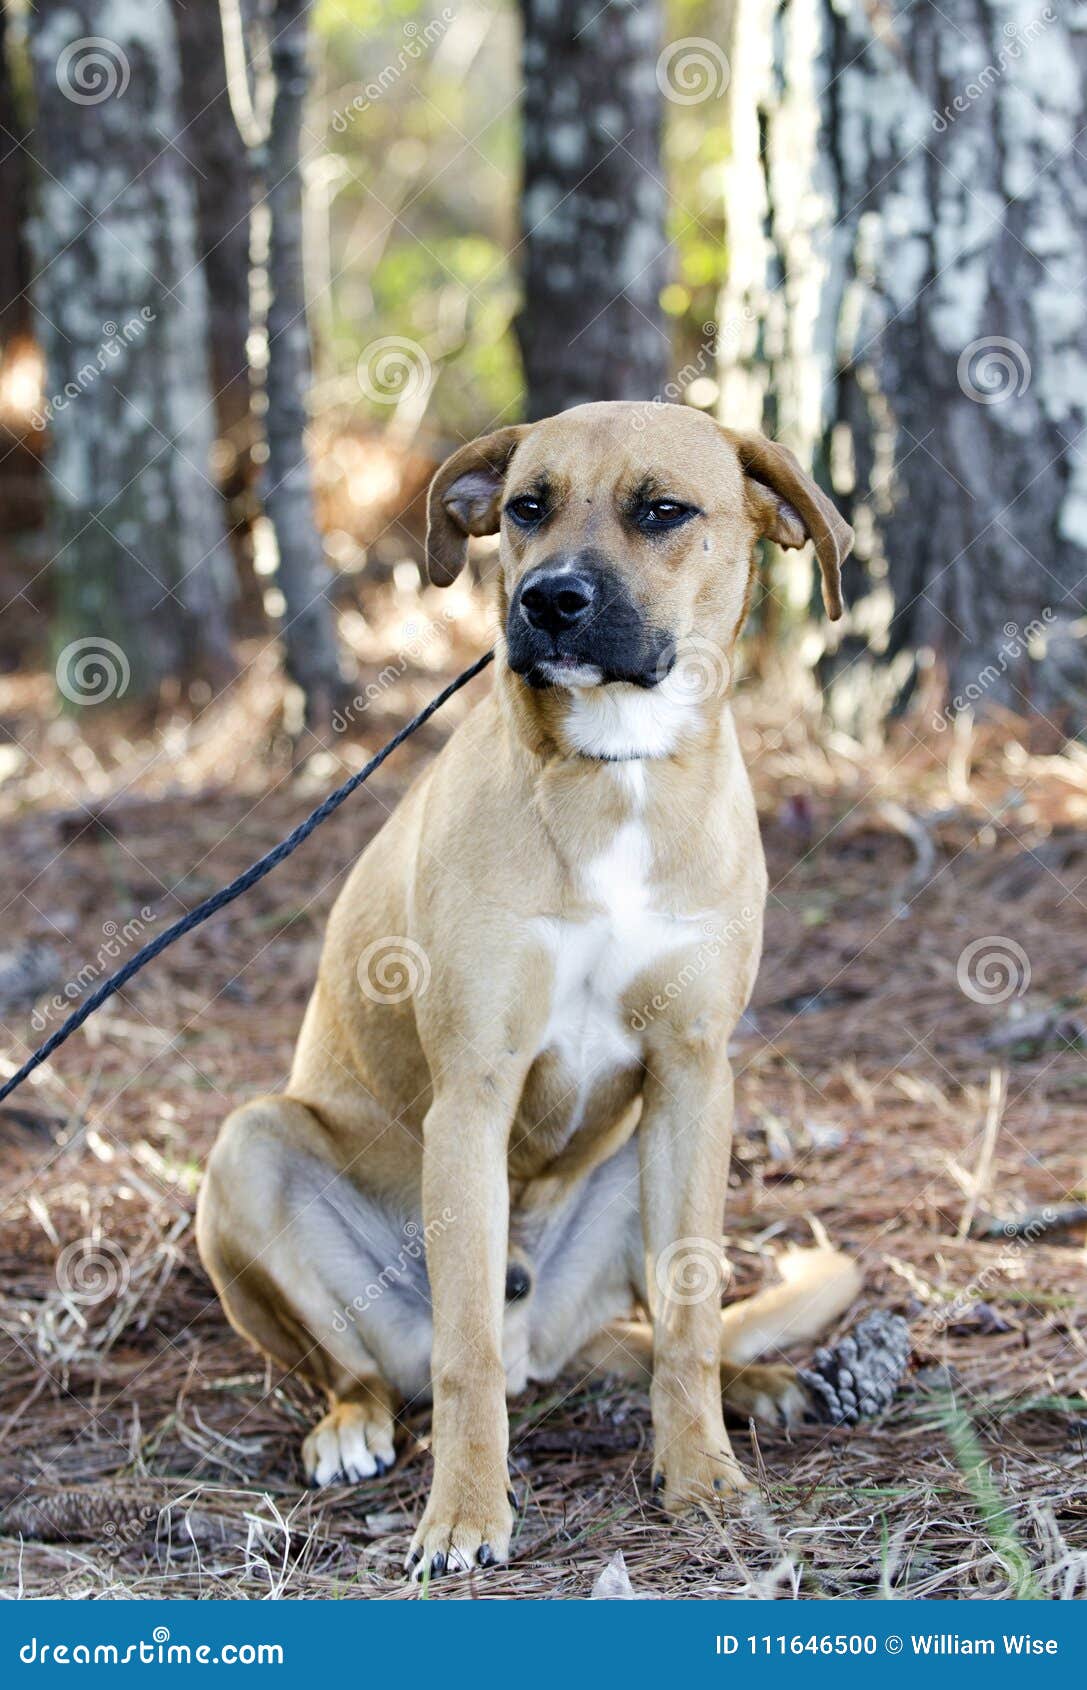 Hound Cur Mixed Breed Dog With Black Muzzle Sitting Stock Photo Image Of County Sitting 111646500